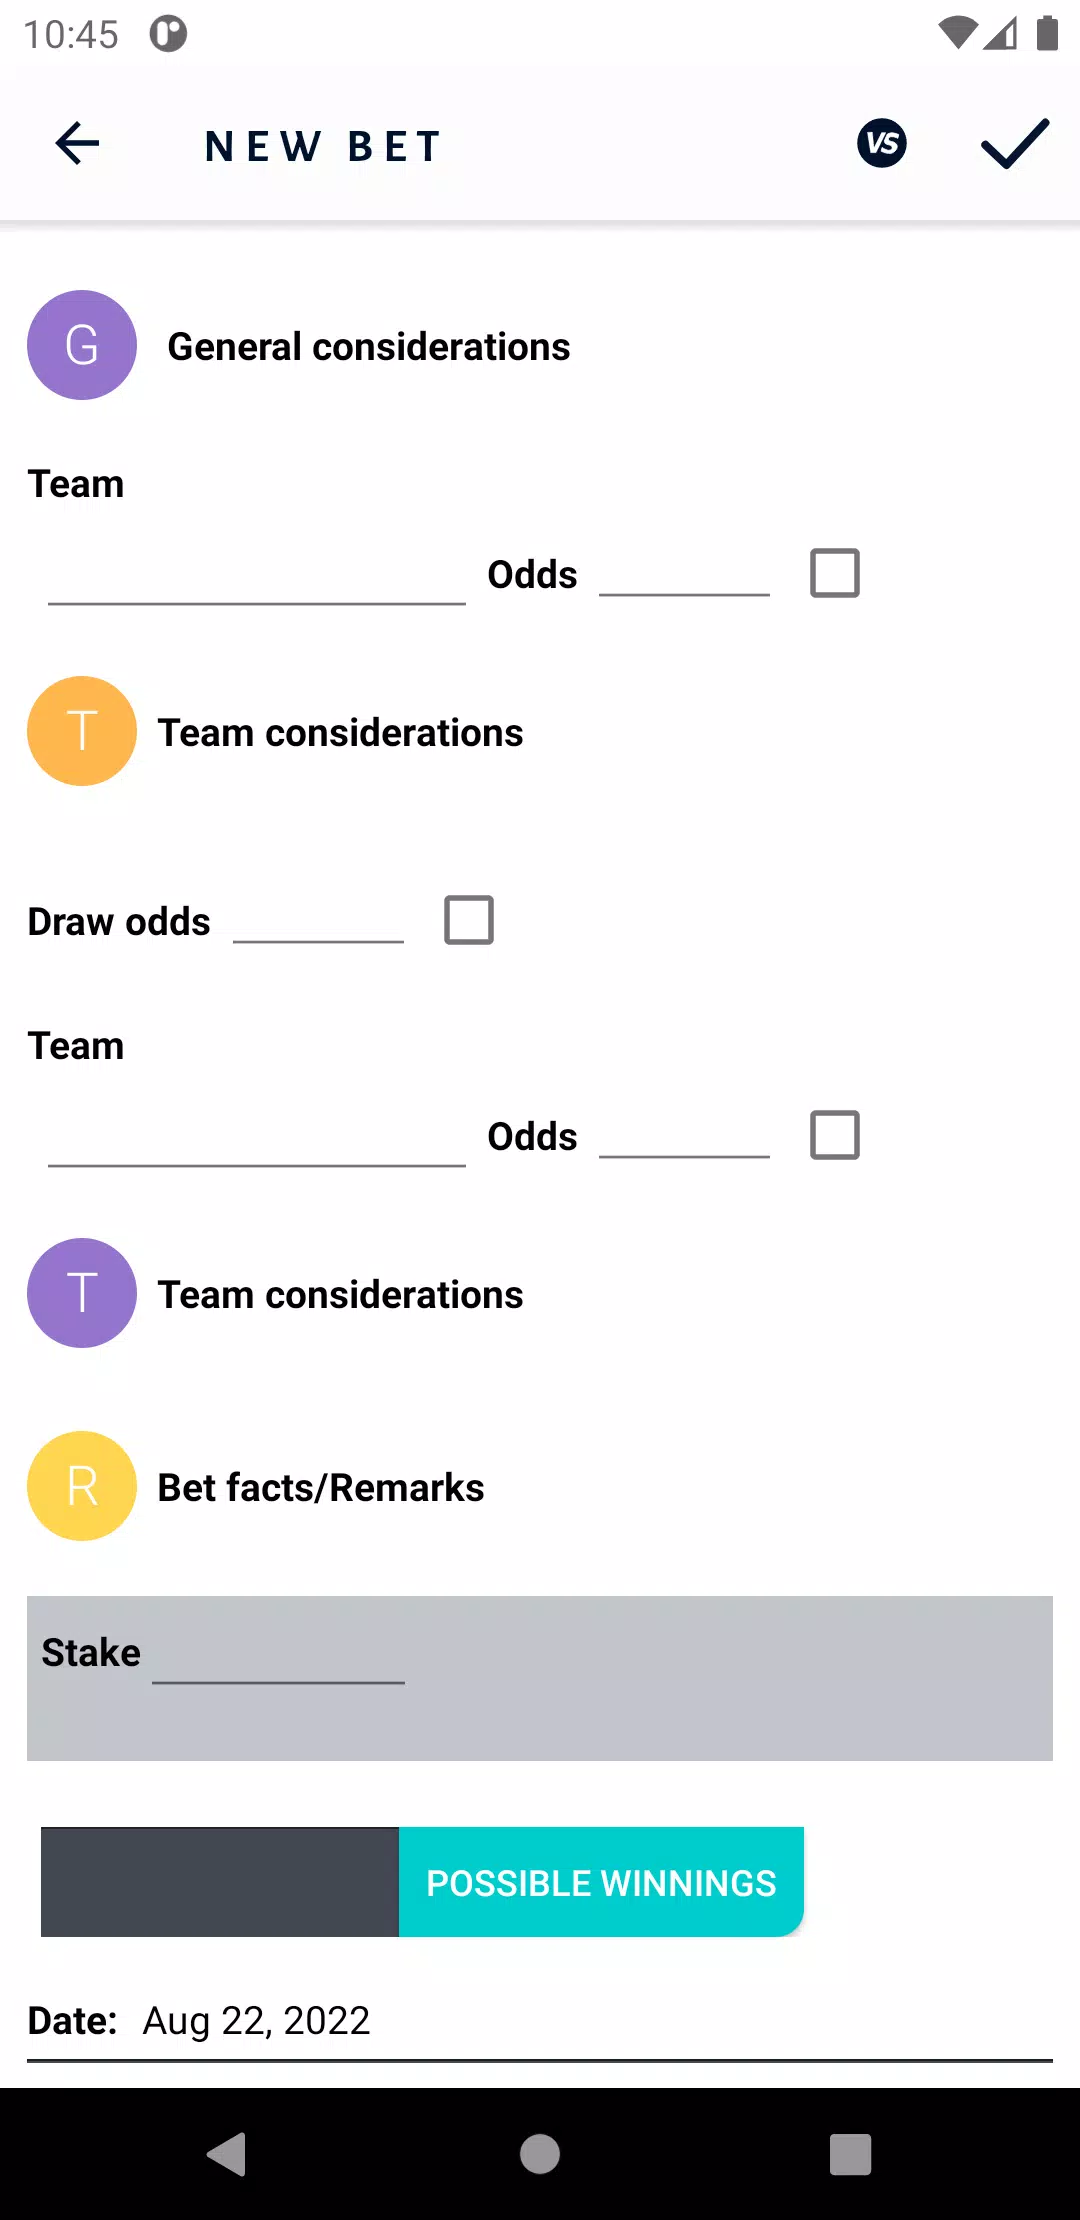 About: BetAssist (Google Play version)